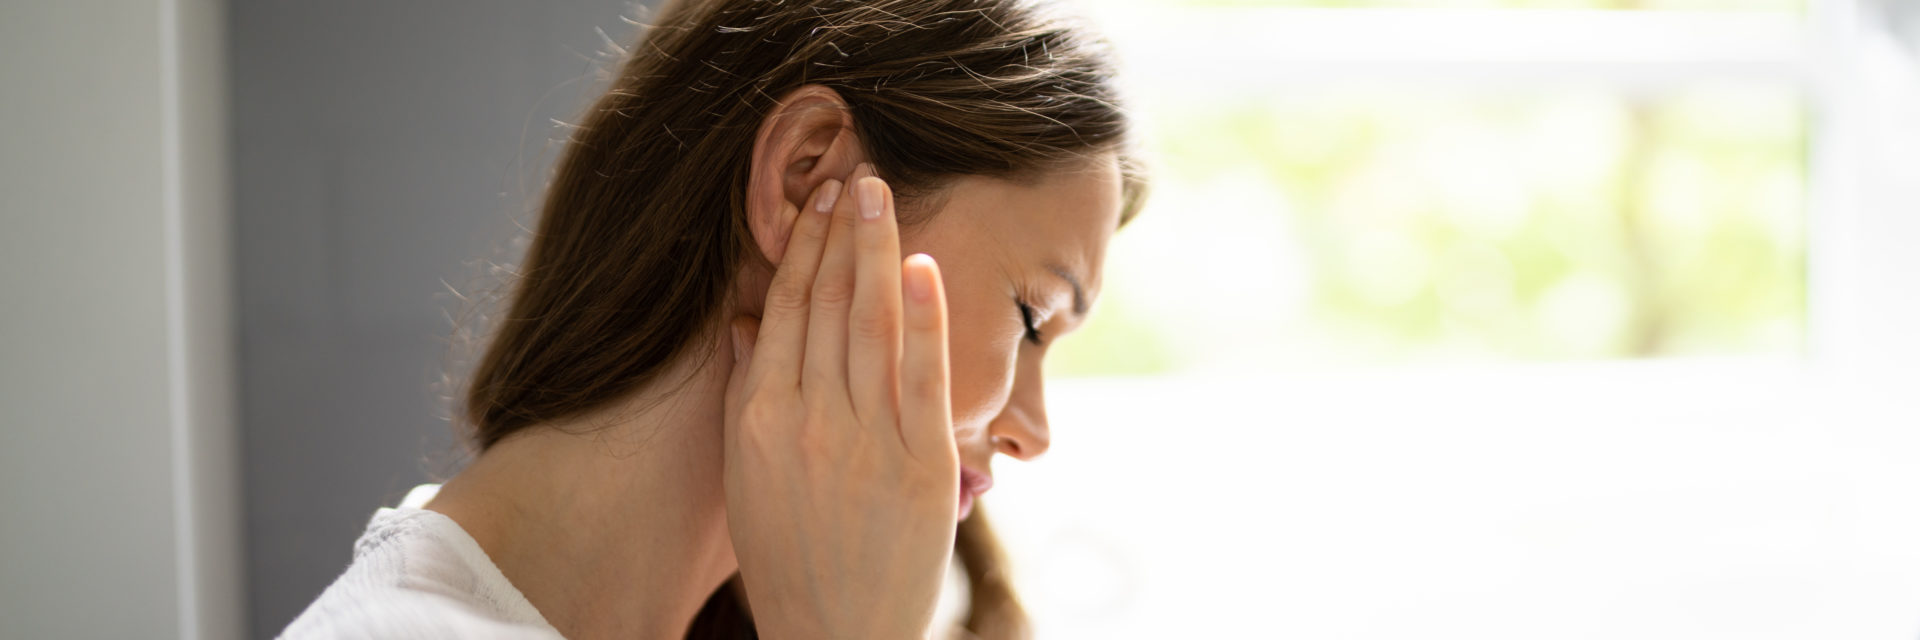 Hearing Aid And Painful Ear Ache